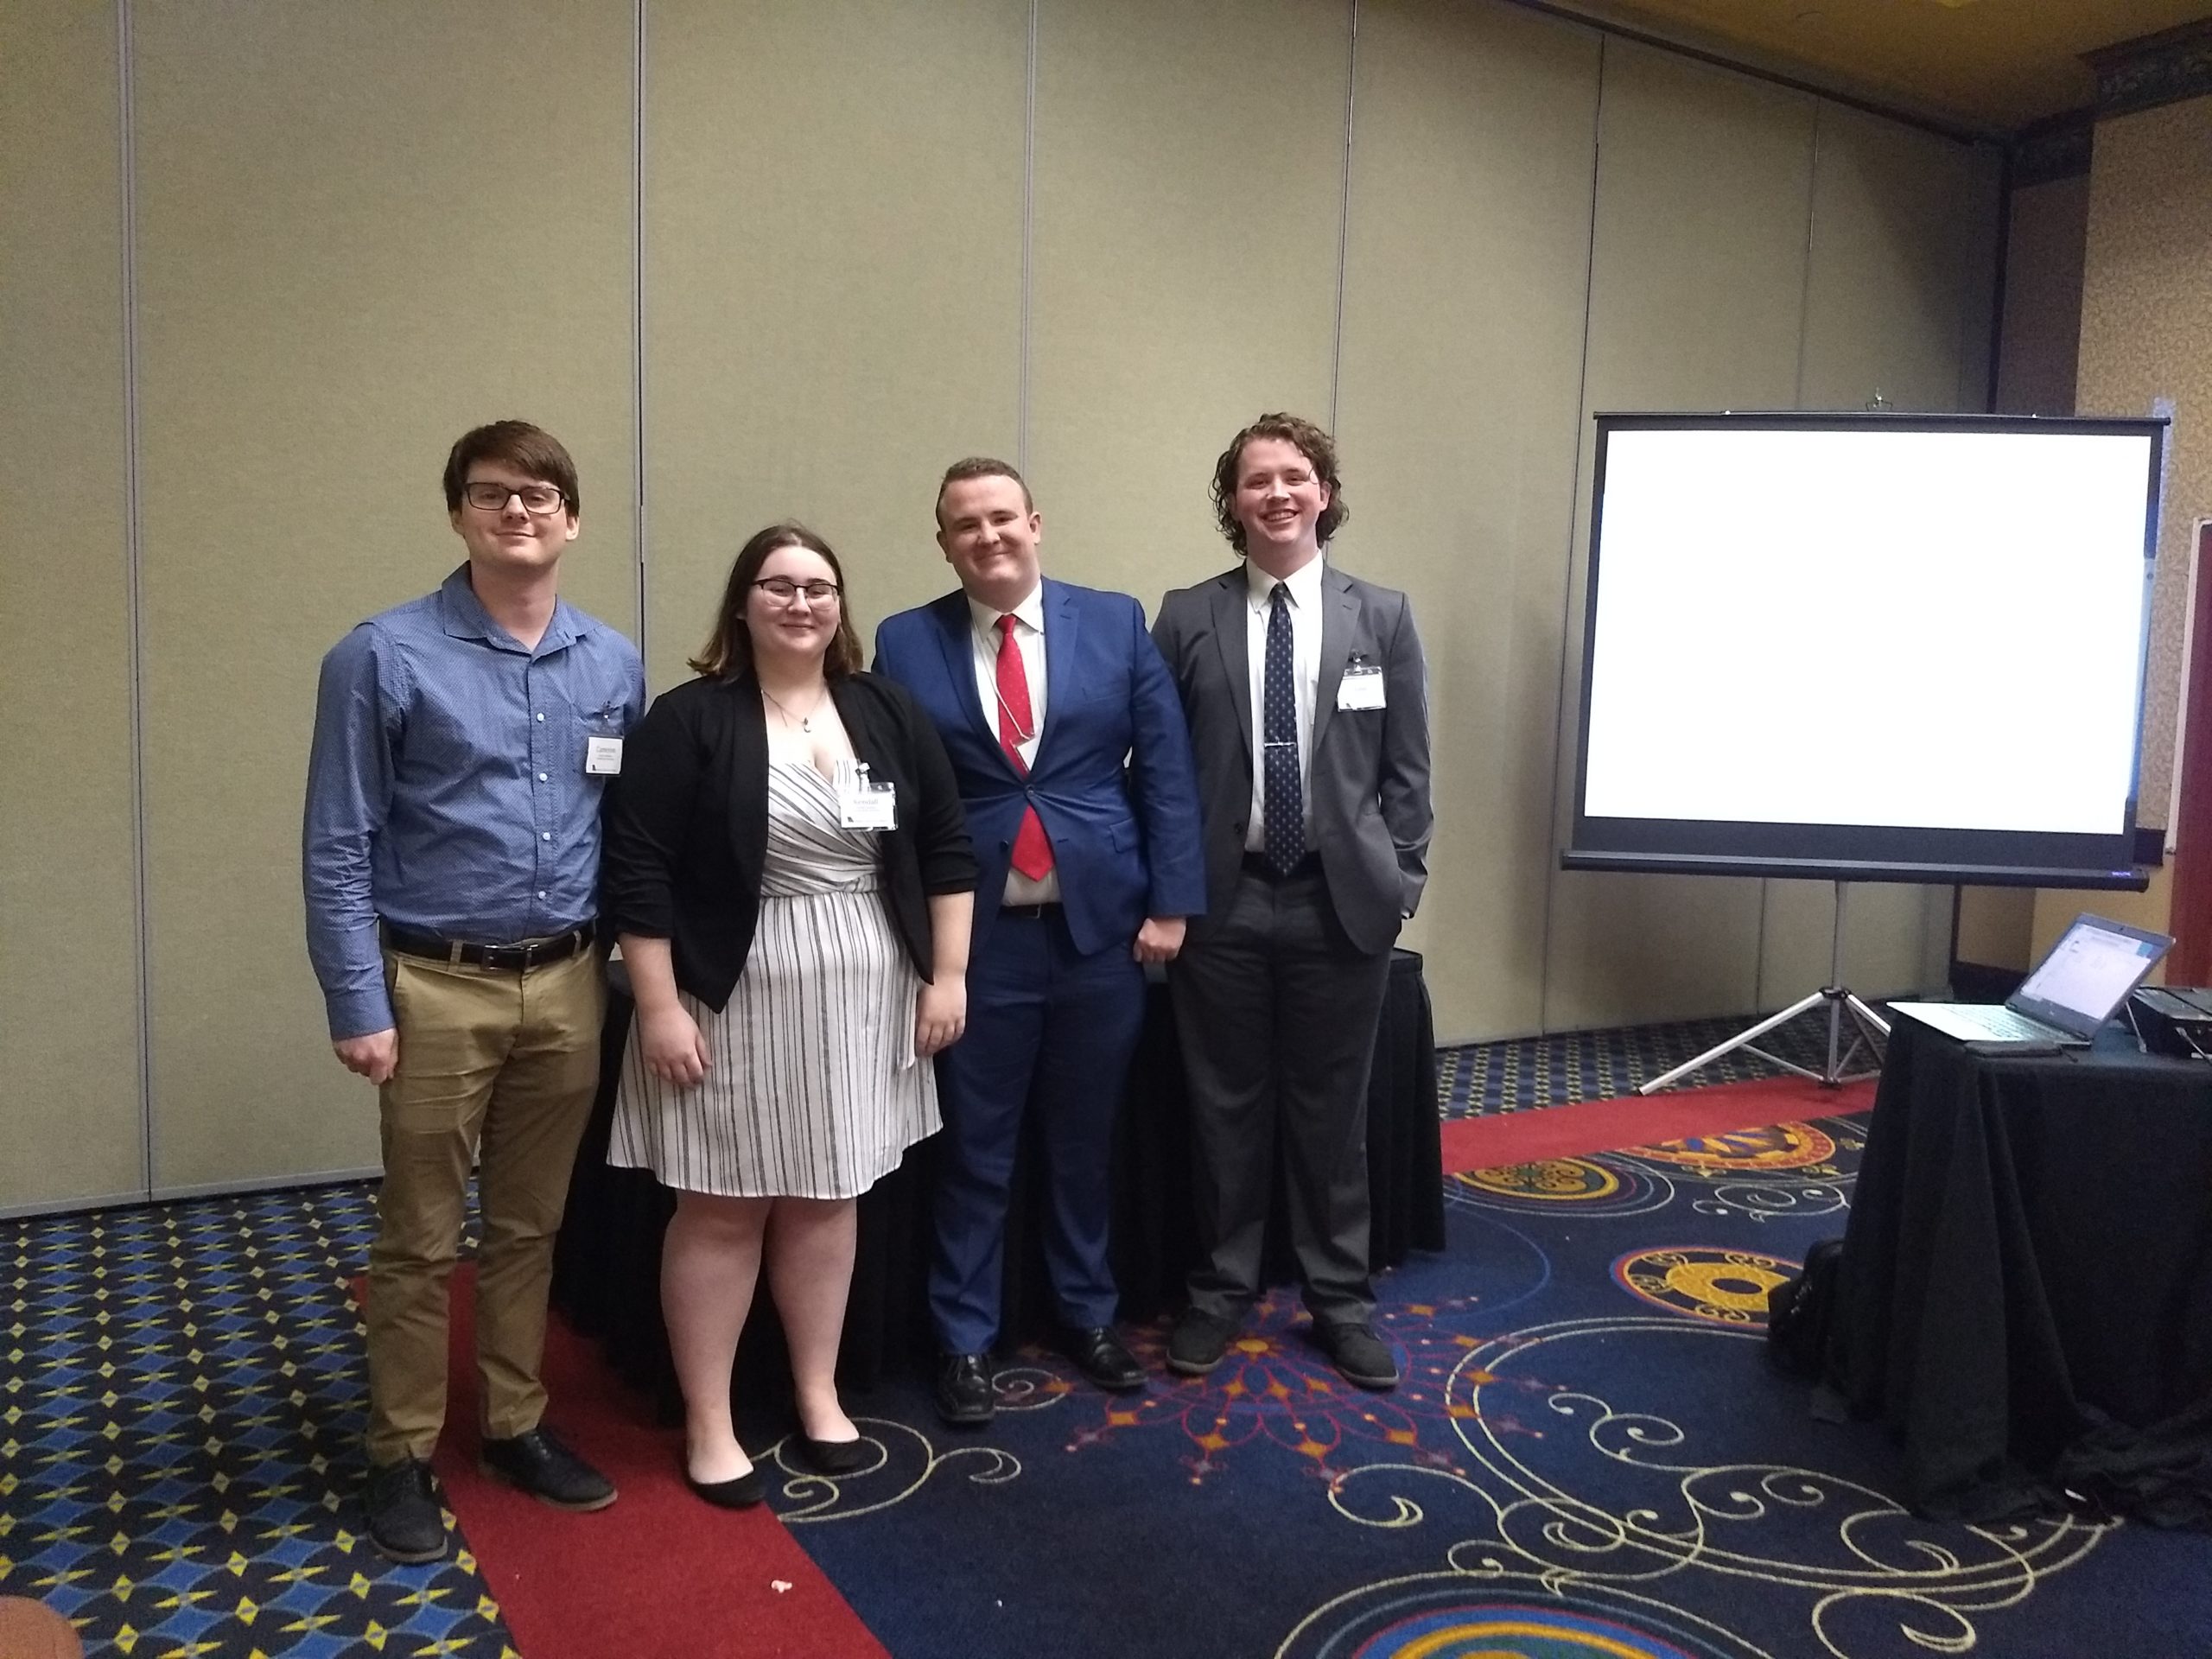 TRUMAN STUDENTS AND PROFESSOR PRESENT PAPERS AT MISSOURI CONFERENCE ON HISTORY